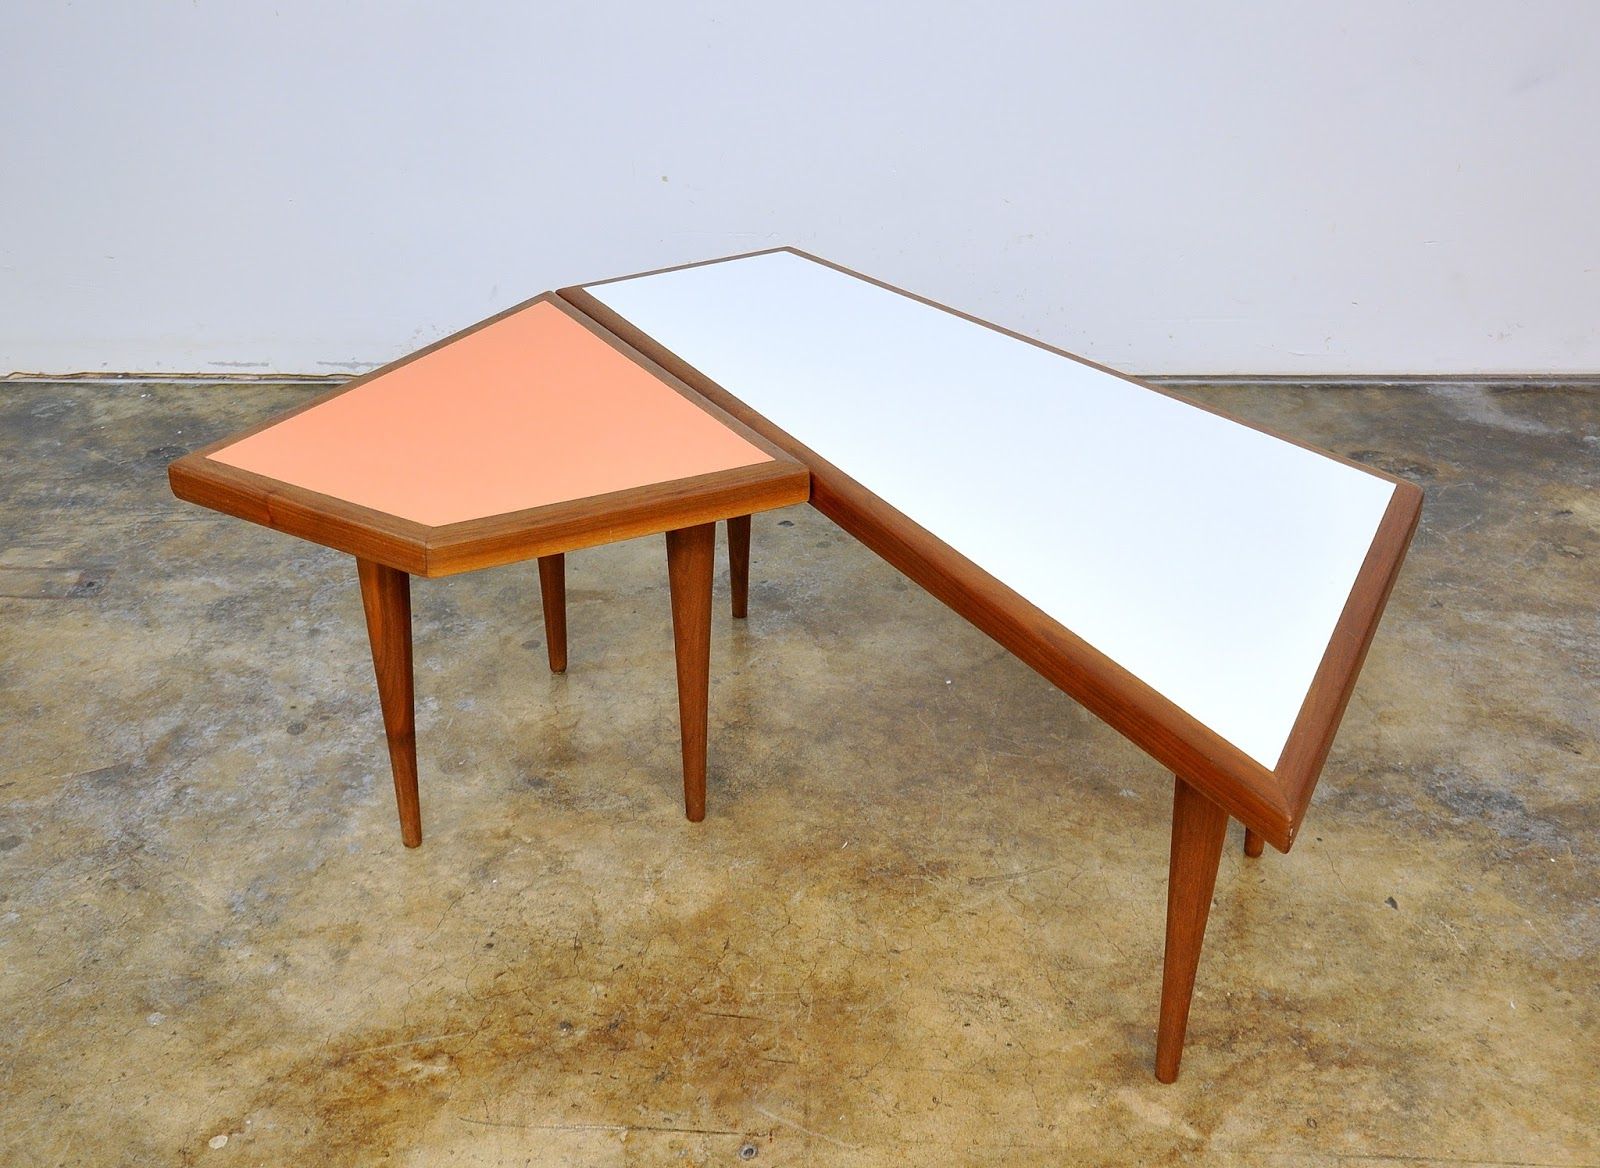 2019 Geometric Glass Modern Coffee Tables Within Select Modern: Danish Modern Teak Geometric Coffee & Side (View 15 of 20)